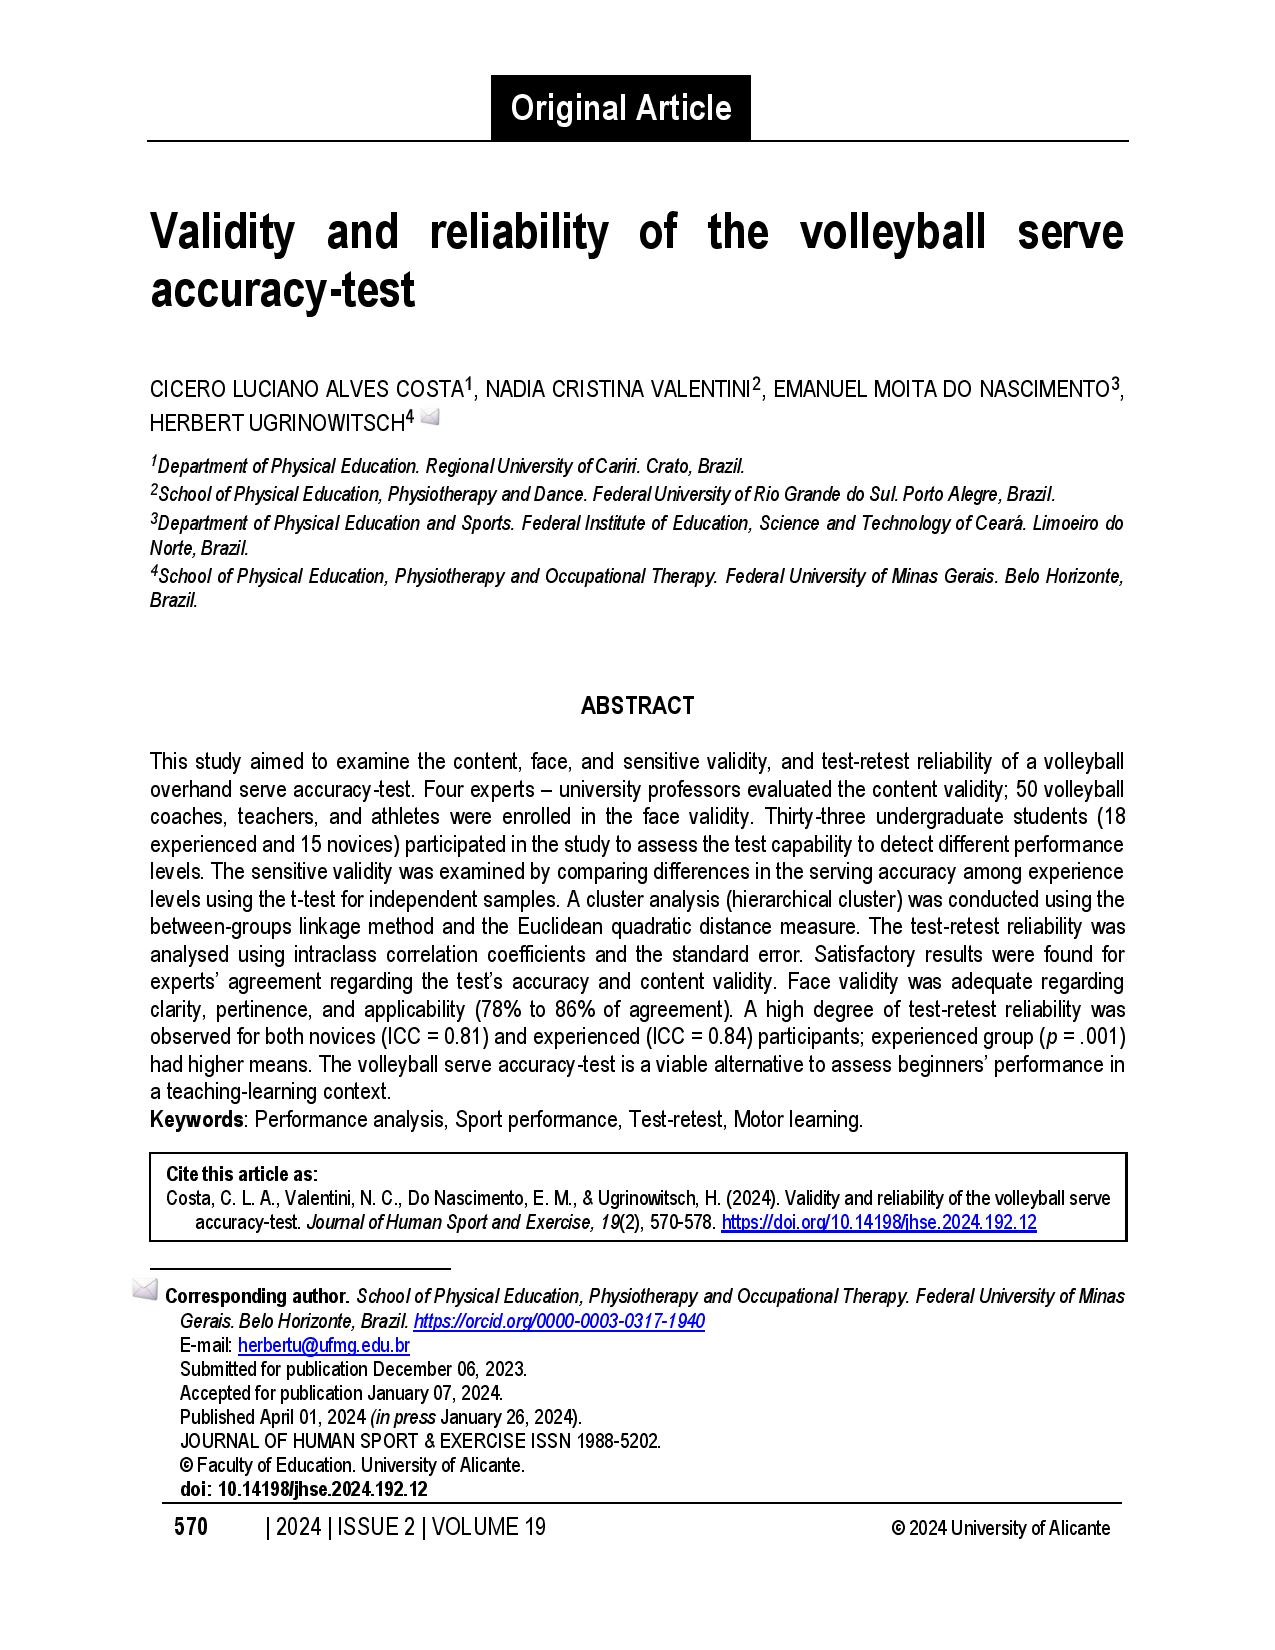 Validity and reliability of the volleyball serve accuracy-test